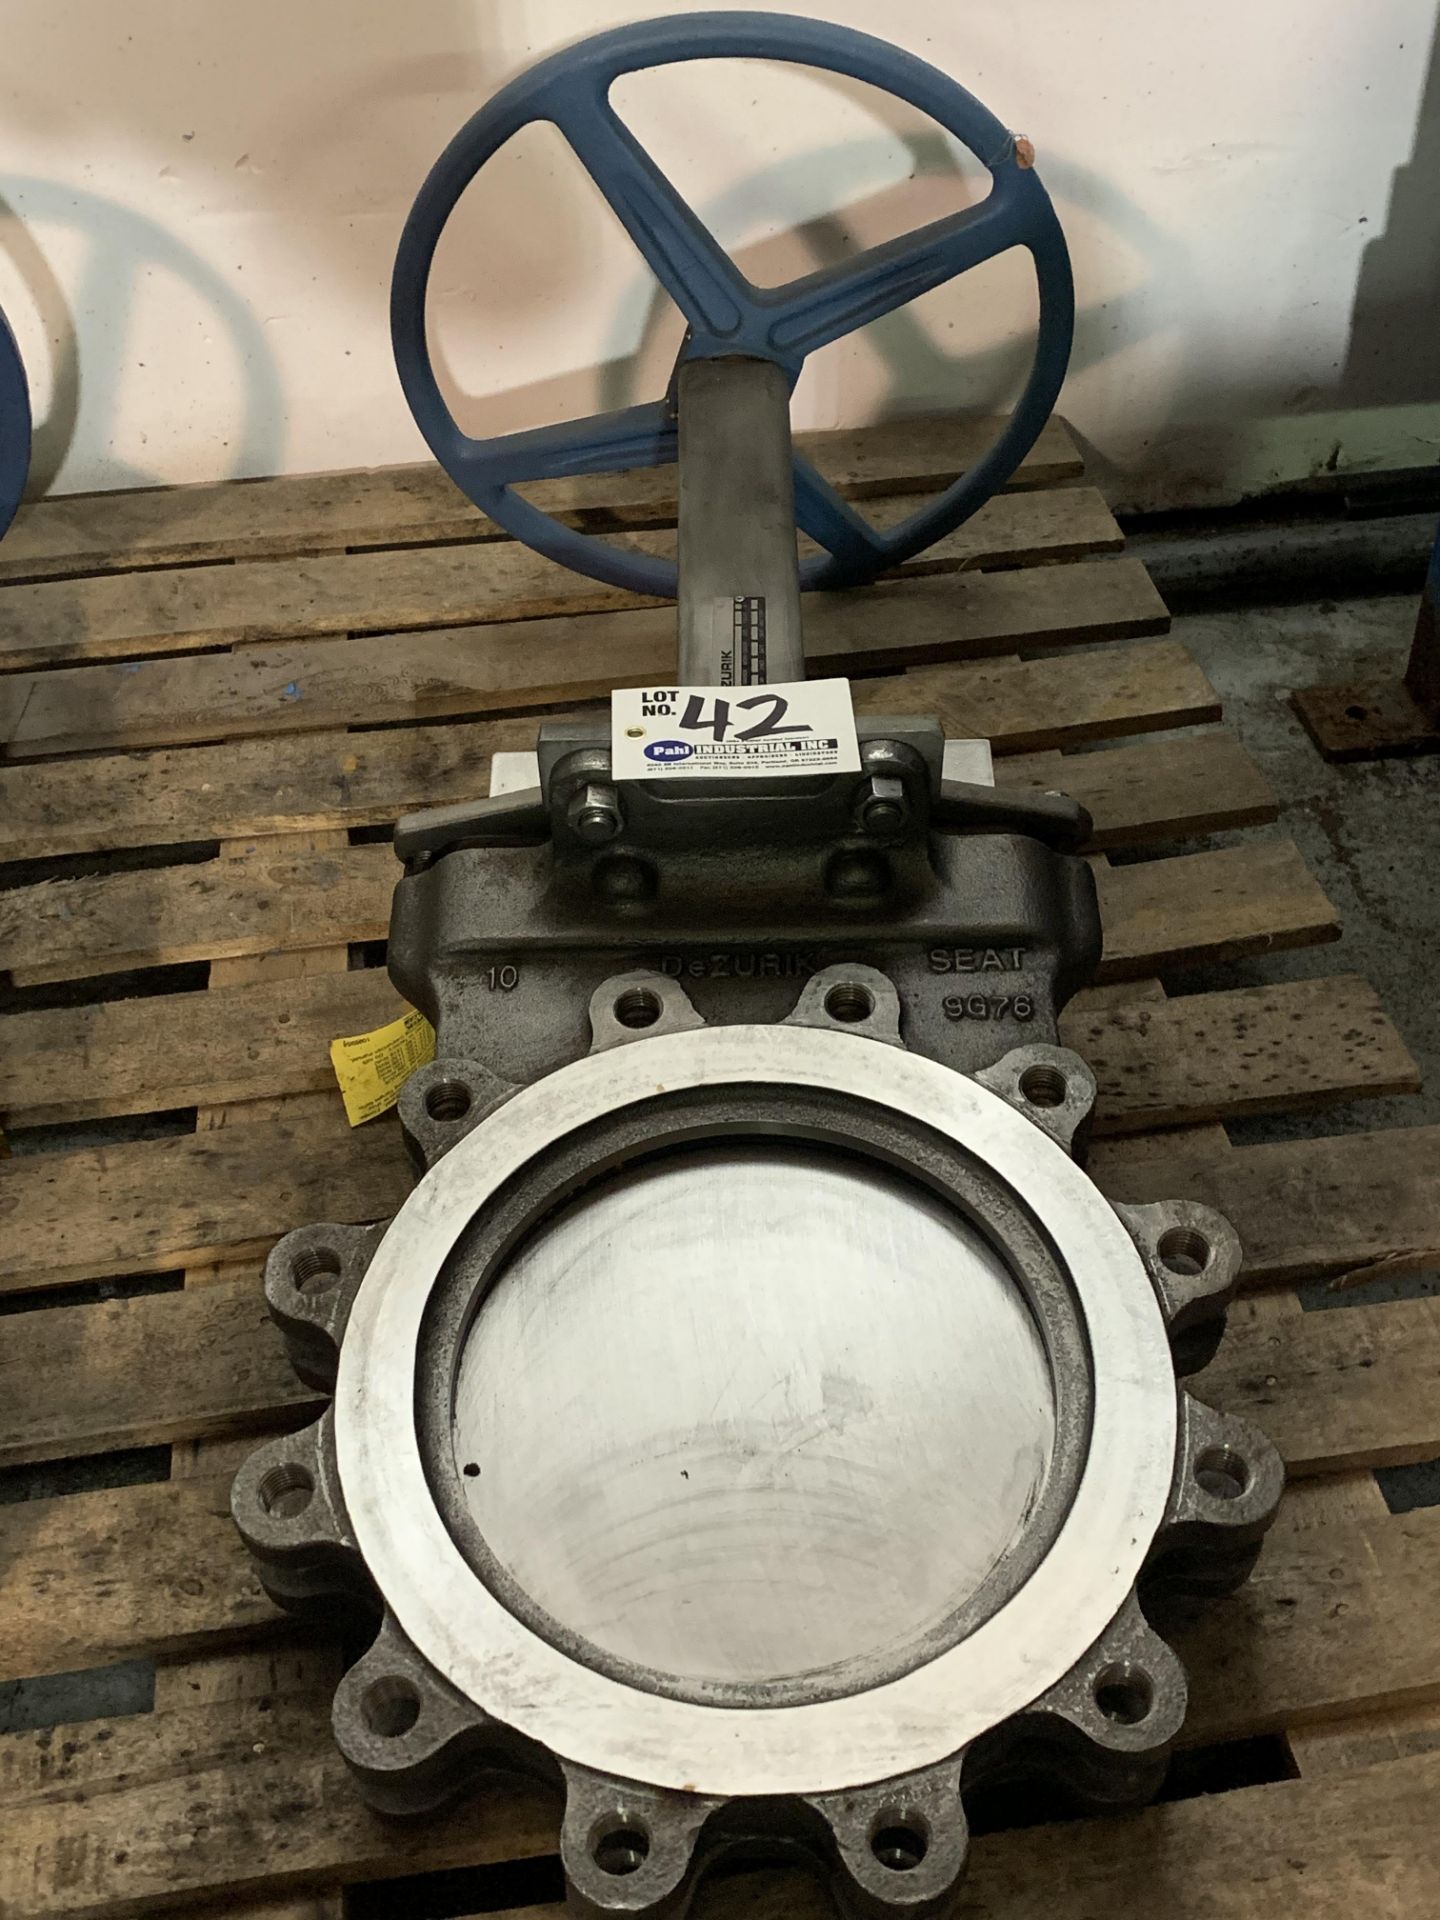 DeZurik 9" Stainless Knife Gate Valve with Wheel, Part No. 9390936R001 NEW - Image 3 of 5